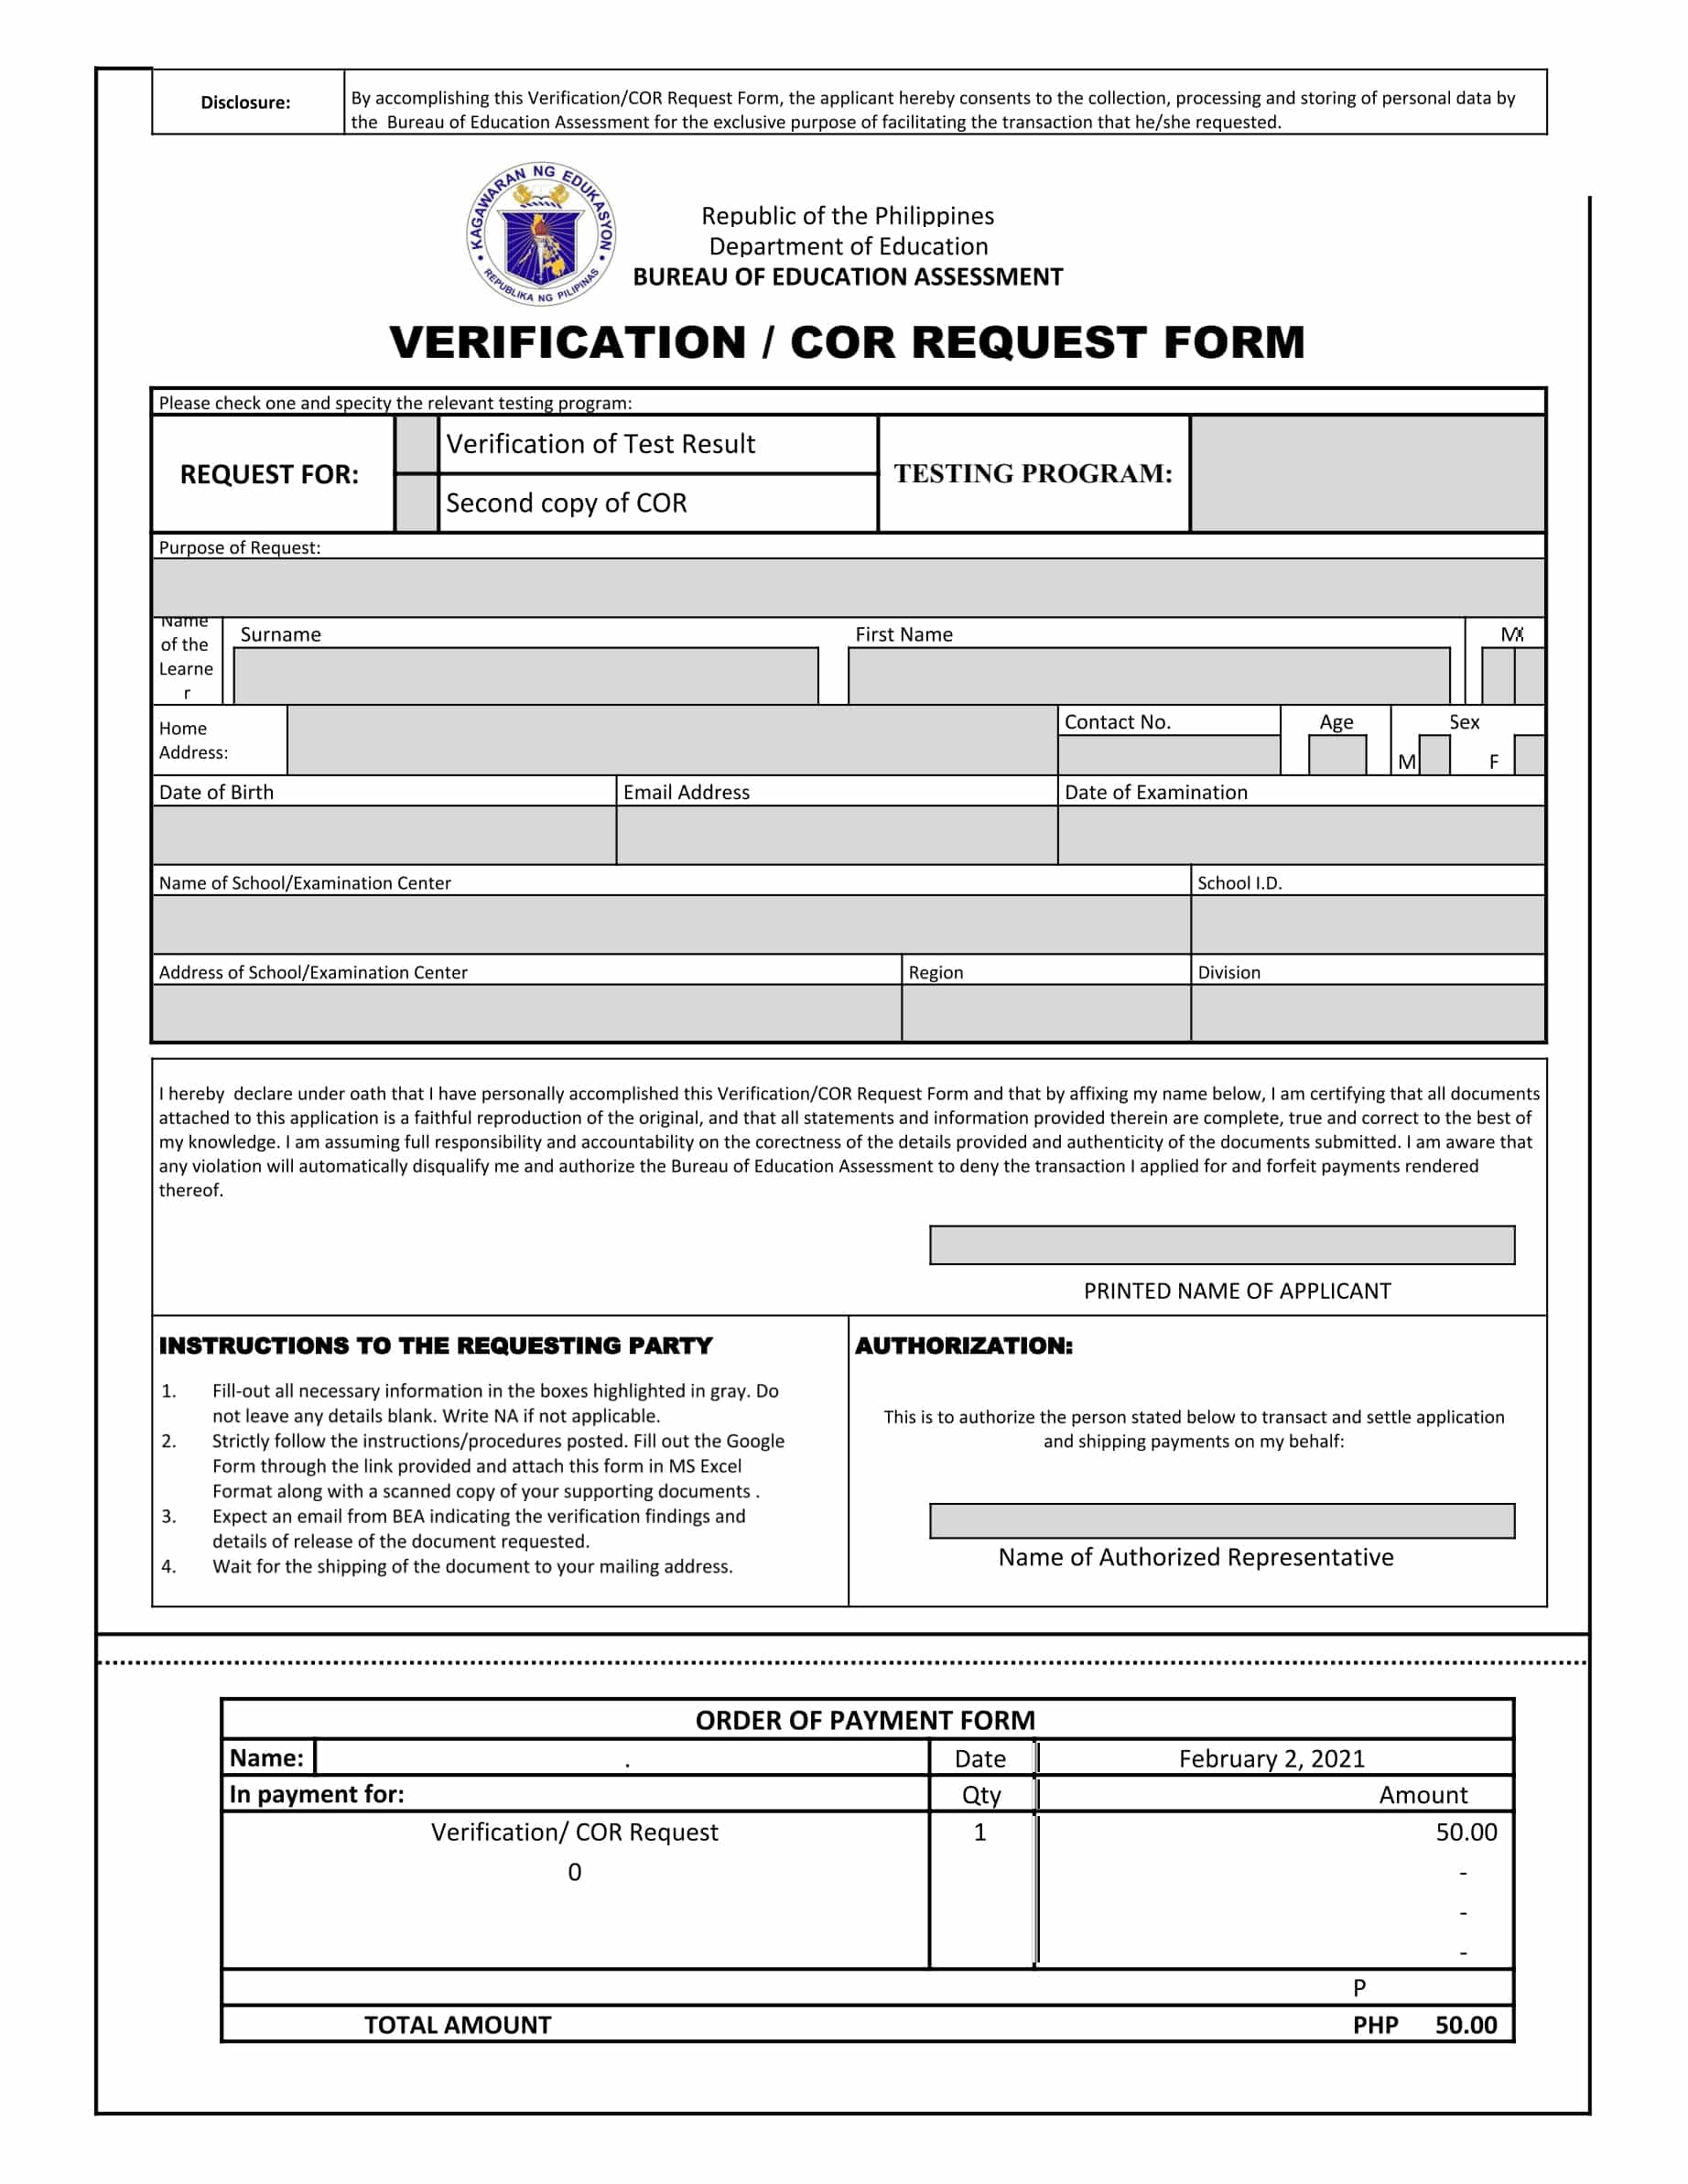 DepEd-BEA Verification and COR Request Form